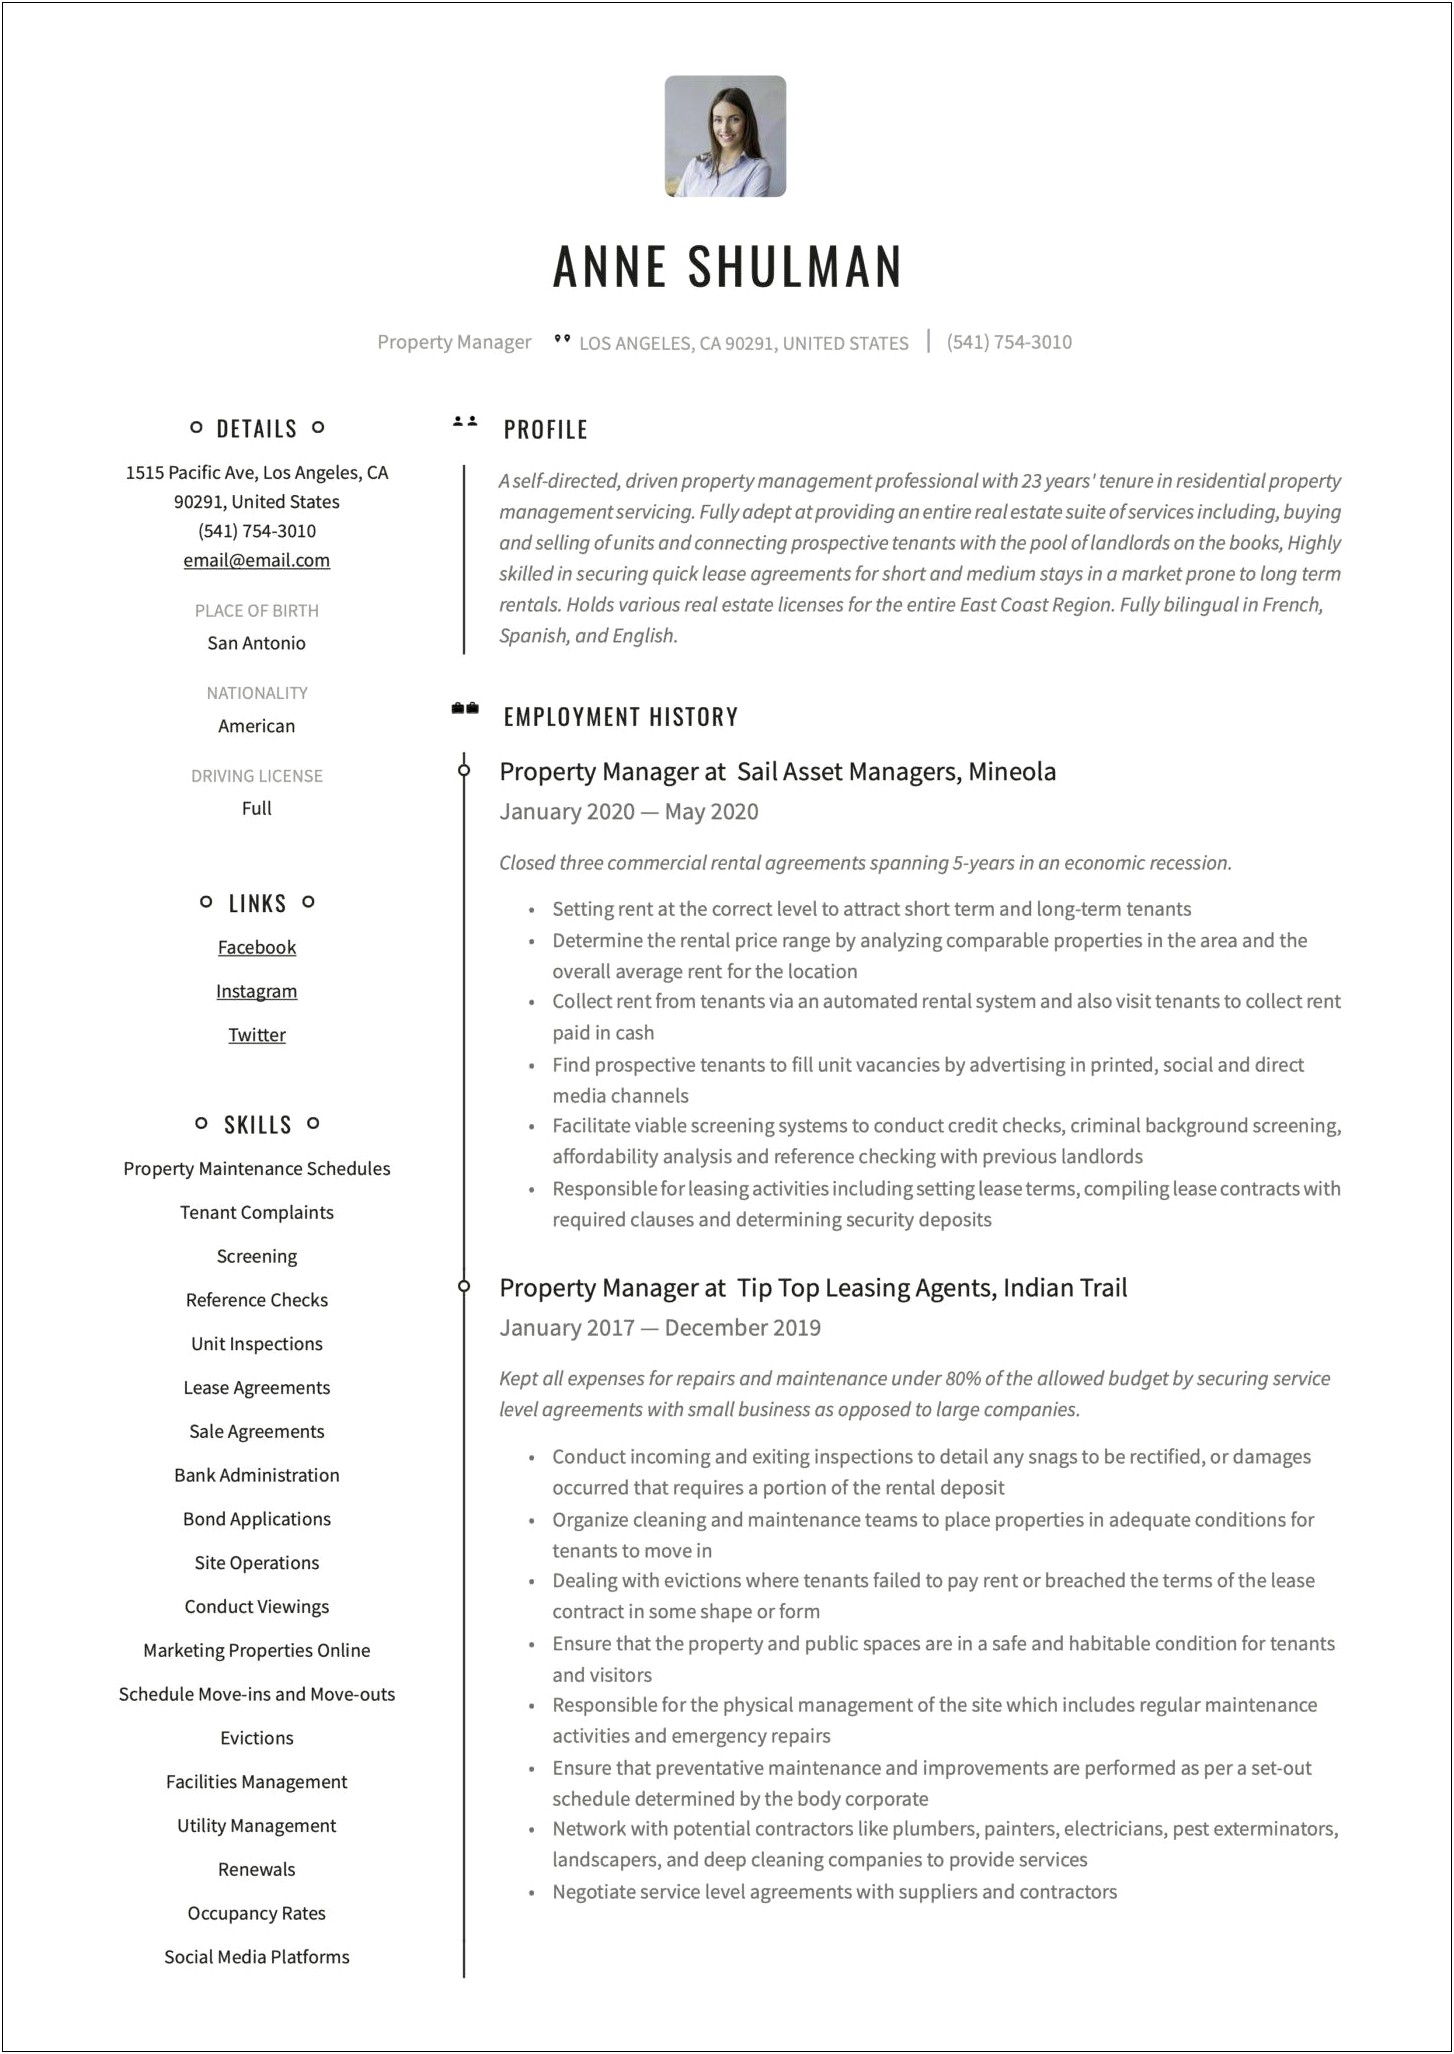 Sample Of An Apartment Property Manager Resume